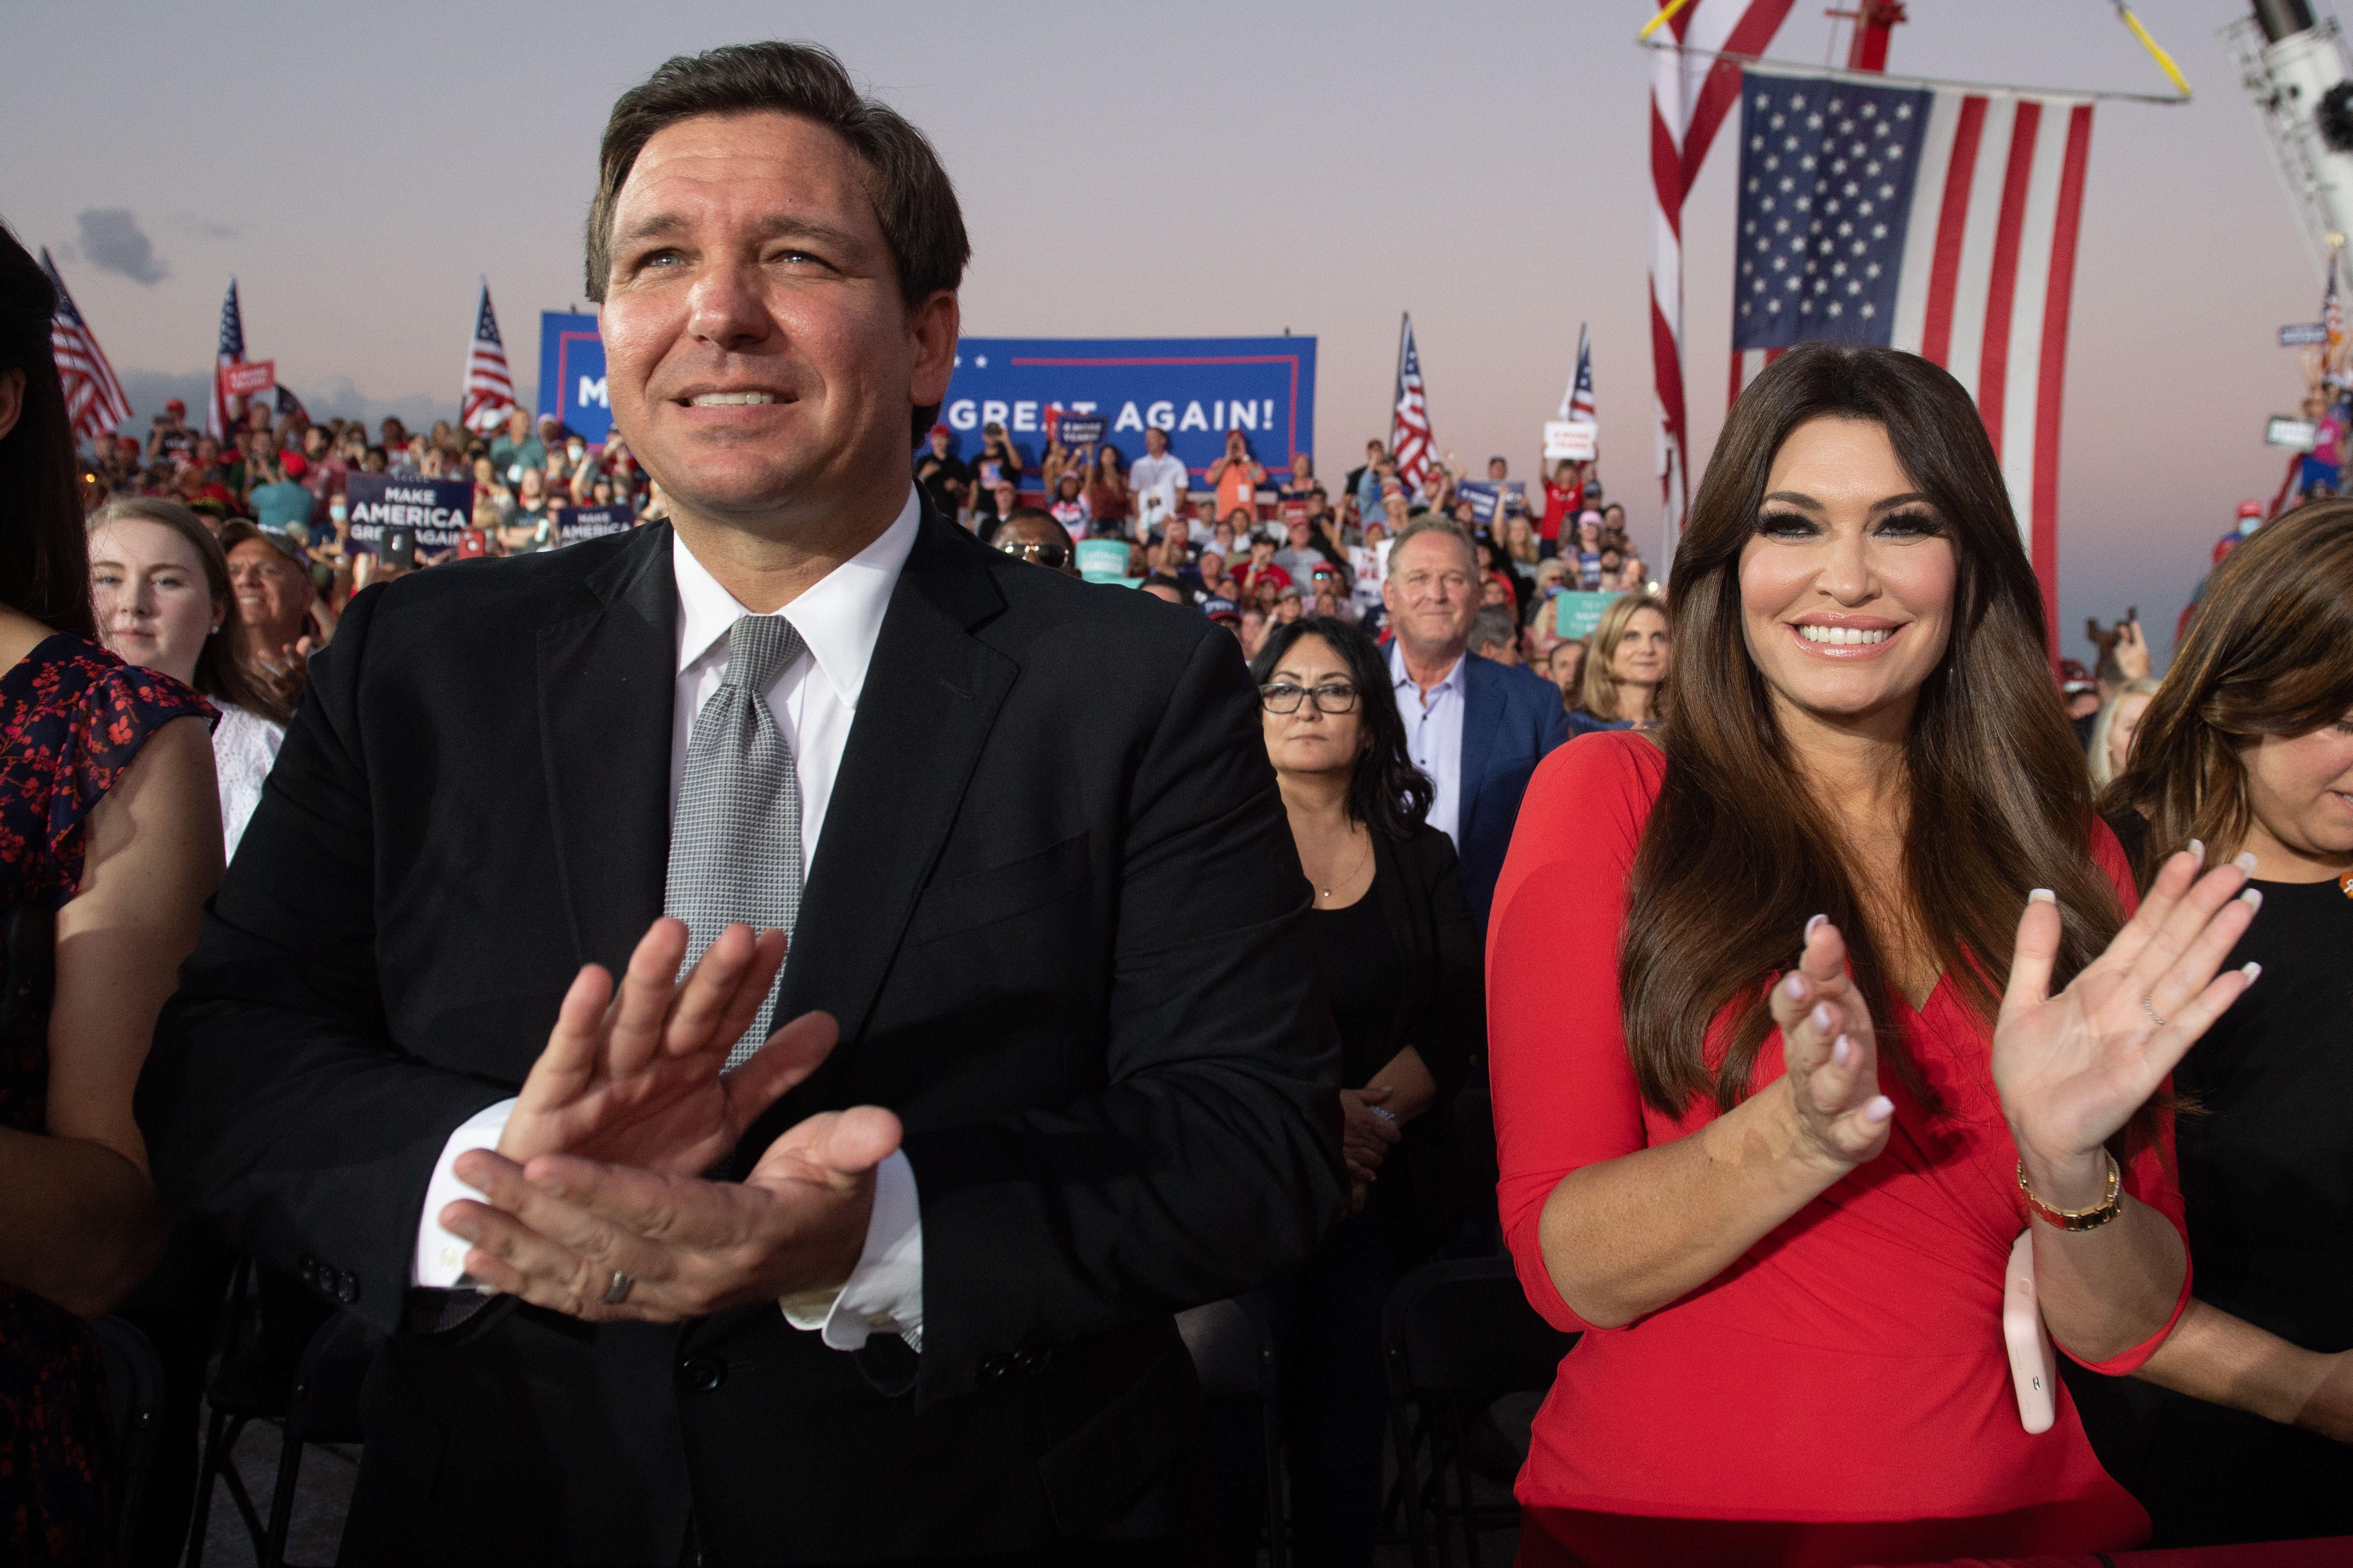 Florida Governor Ron DeSantis (L) and Kimberly Guilfoyle (R), finance chair of US President Donald Trump's campaign, applaud as Trump holds a Make America Great Again rally as he campaigns at Orlando Sanford International Airport in Sanford, Florida, October 12, 2020.